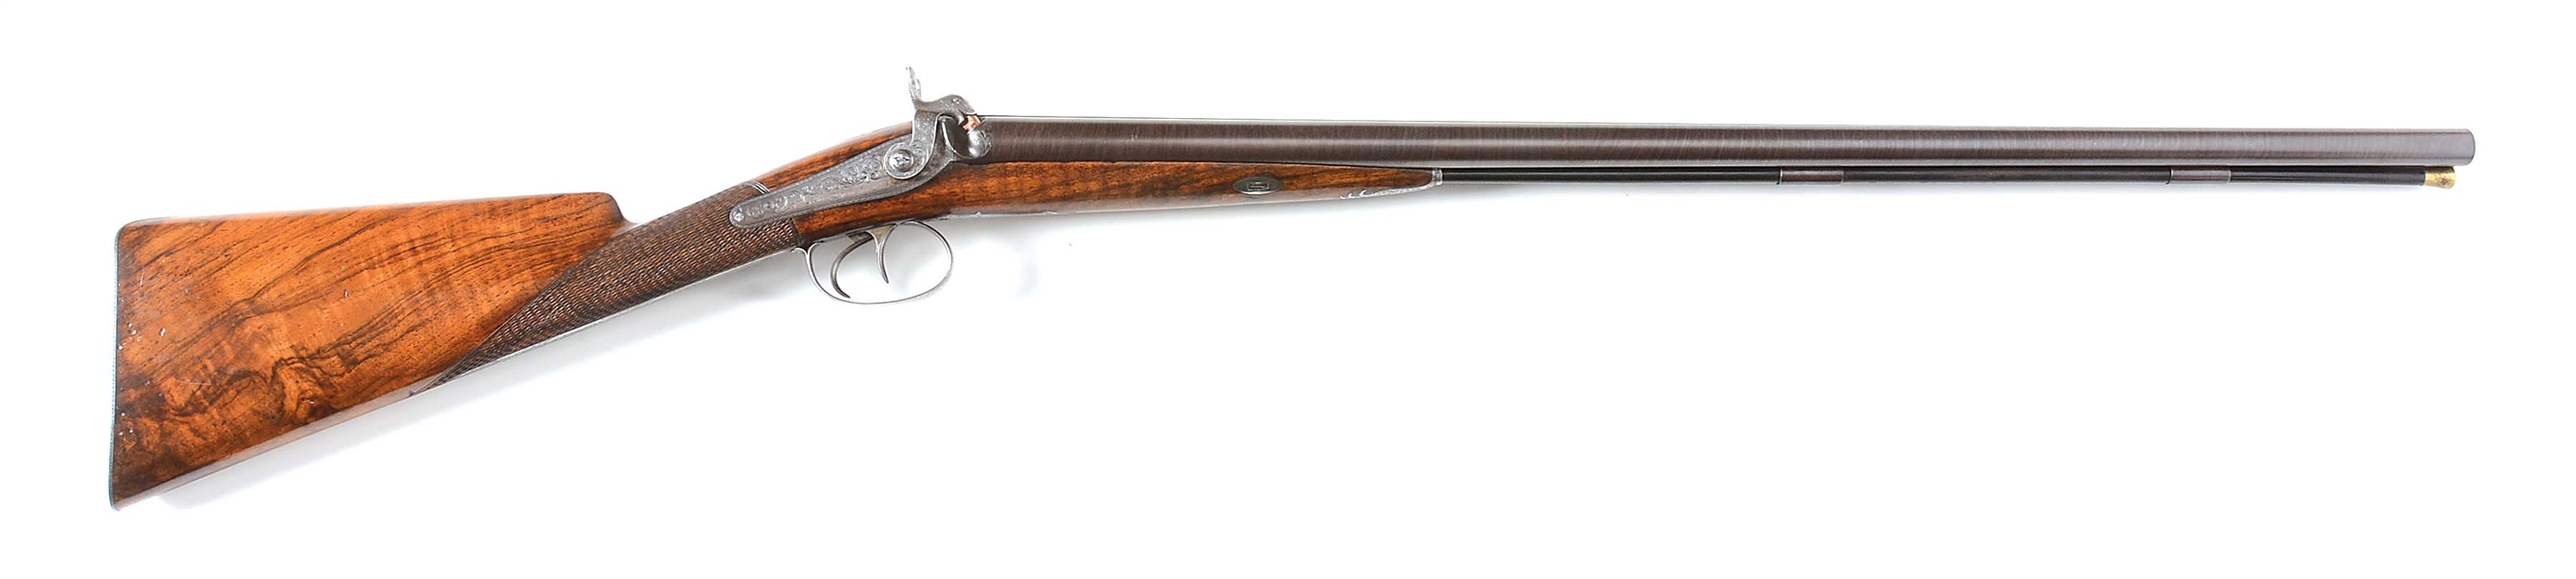 (A) GEORGE THOMSON SIDE BY SIDE PERCUSSION SHOTGUN.